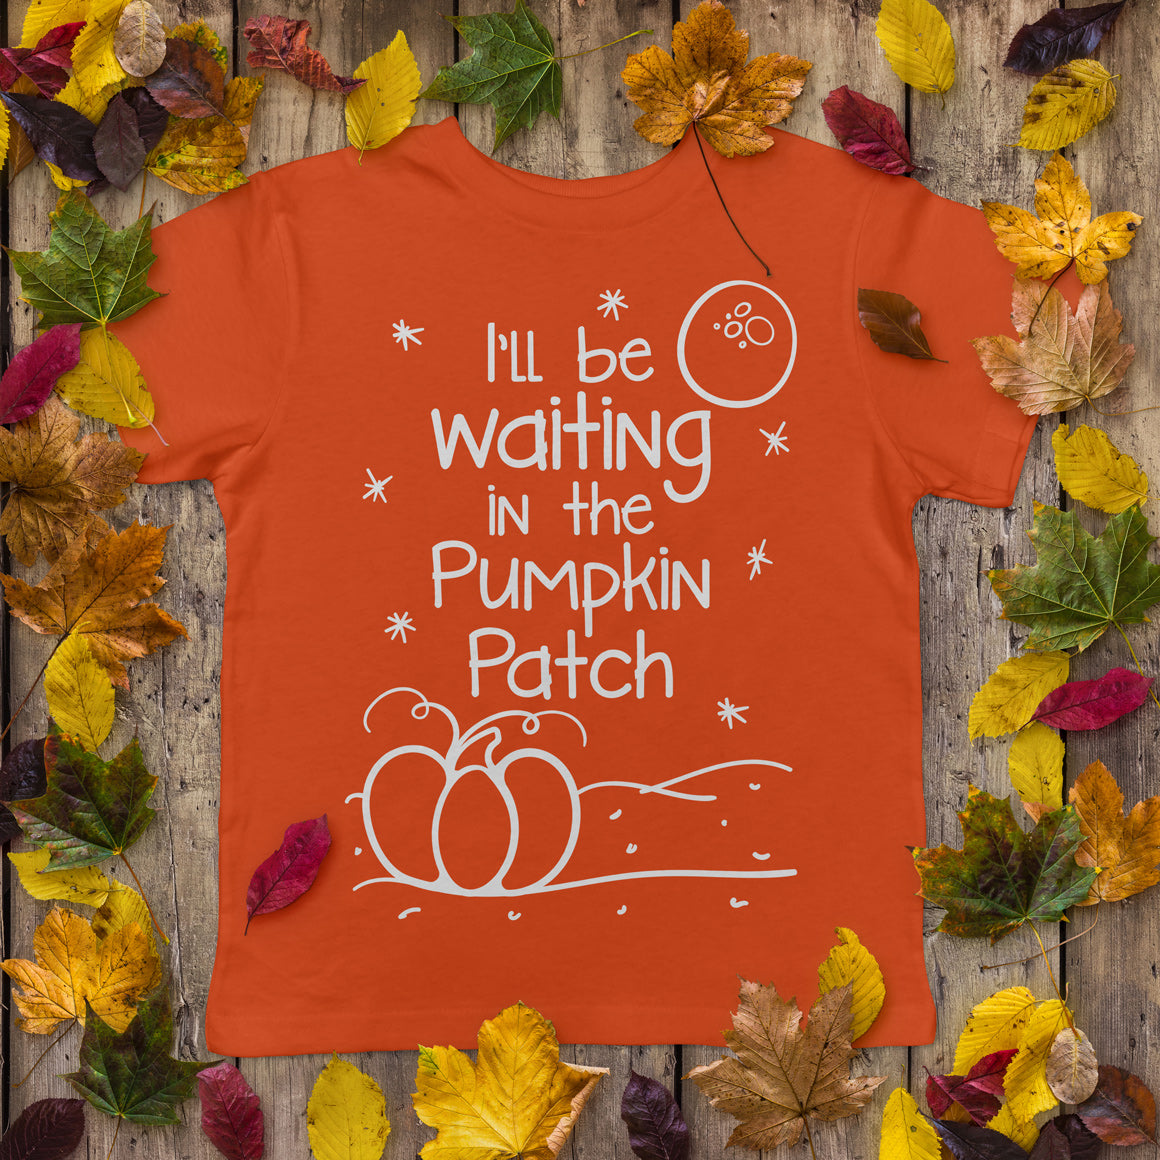 Freebie Friday SVG - I'll Be Waiting in the Pumpkin Patch hand sketched Halloween scene